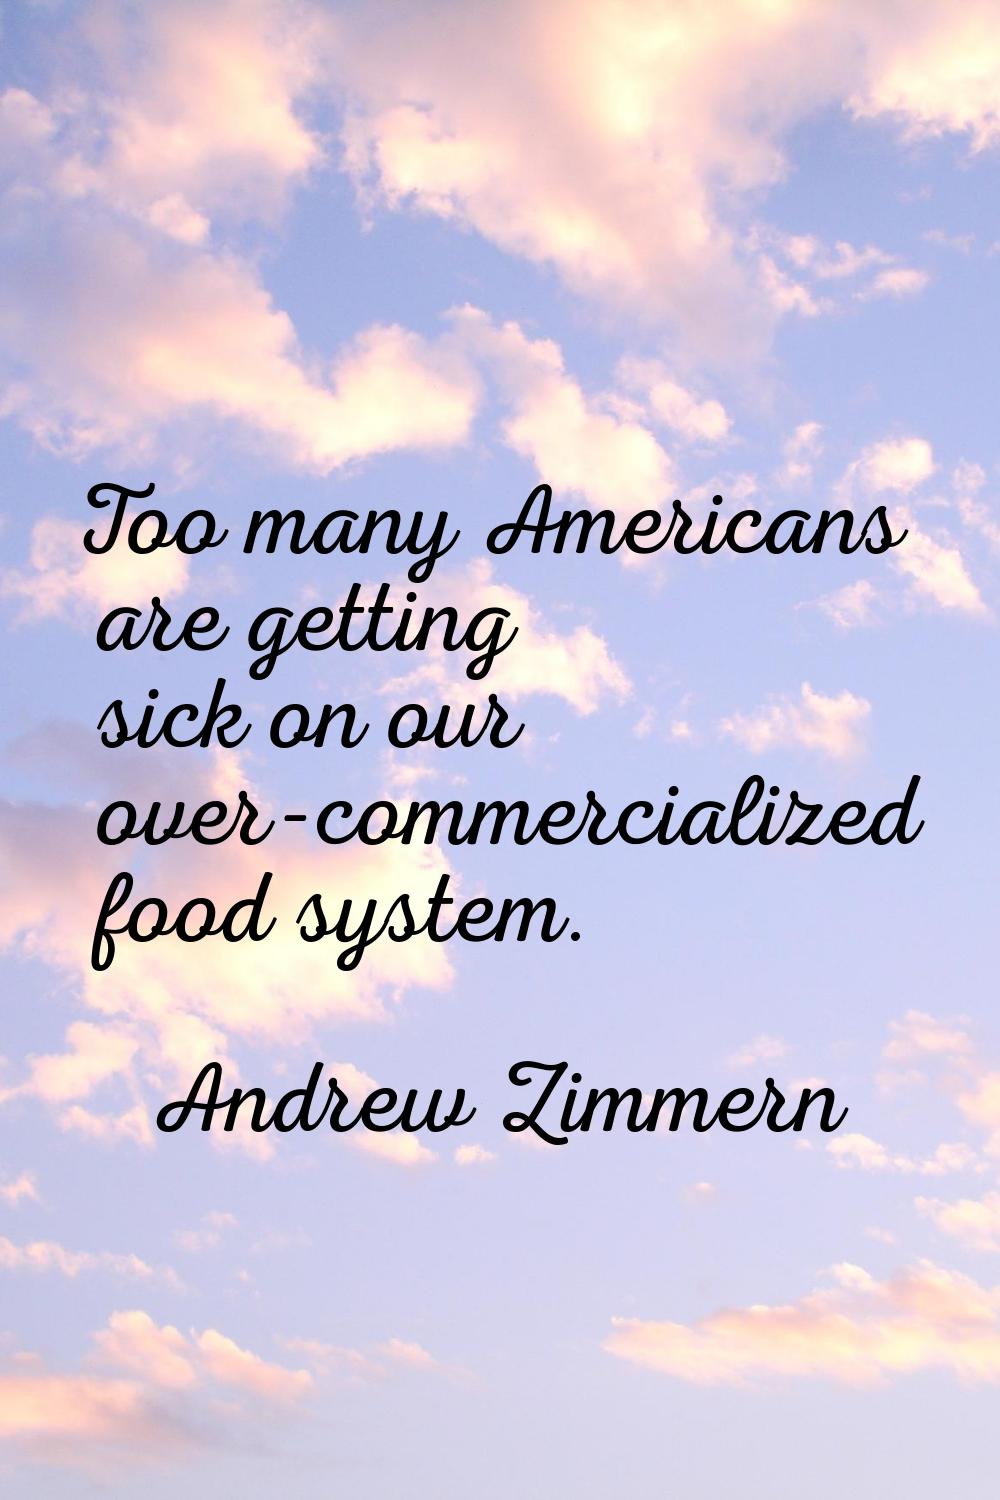 Too many Americans are getting sick on our over-commercialized food system.